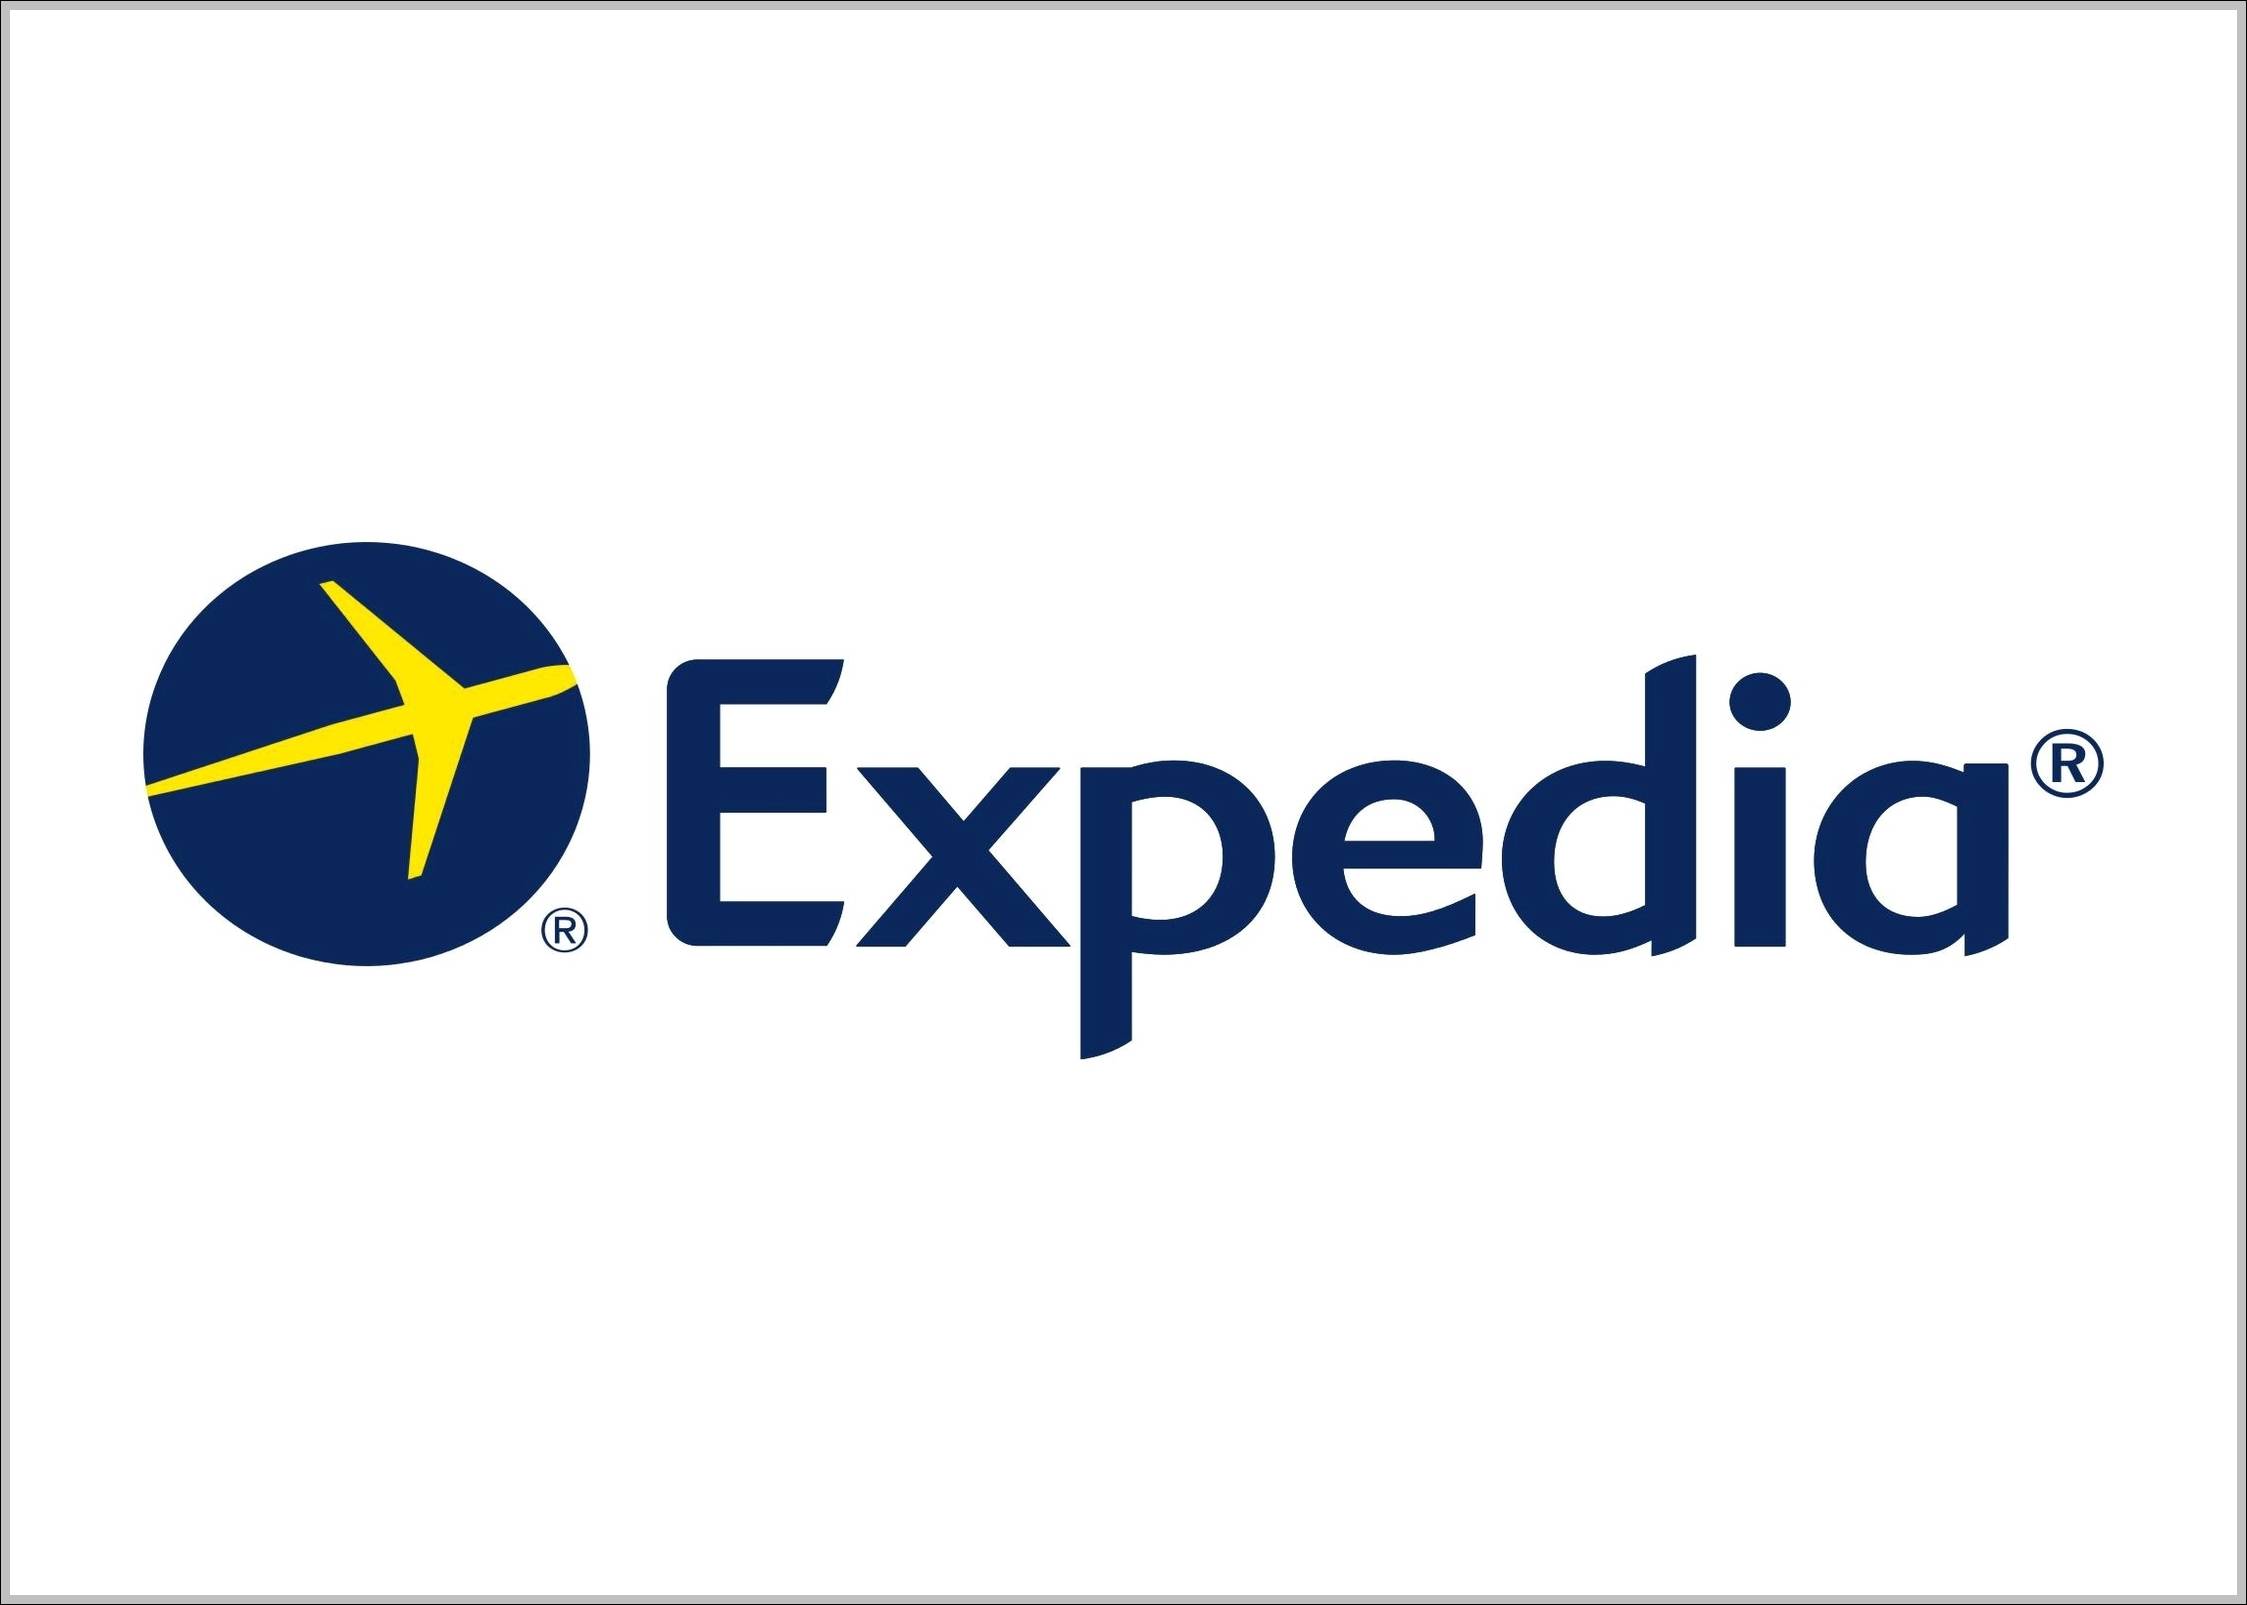 Expedia logo and sign